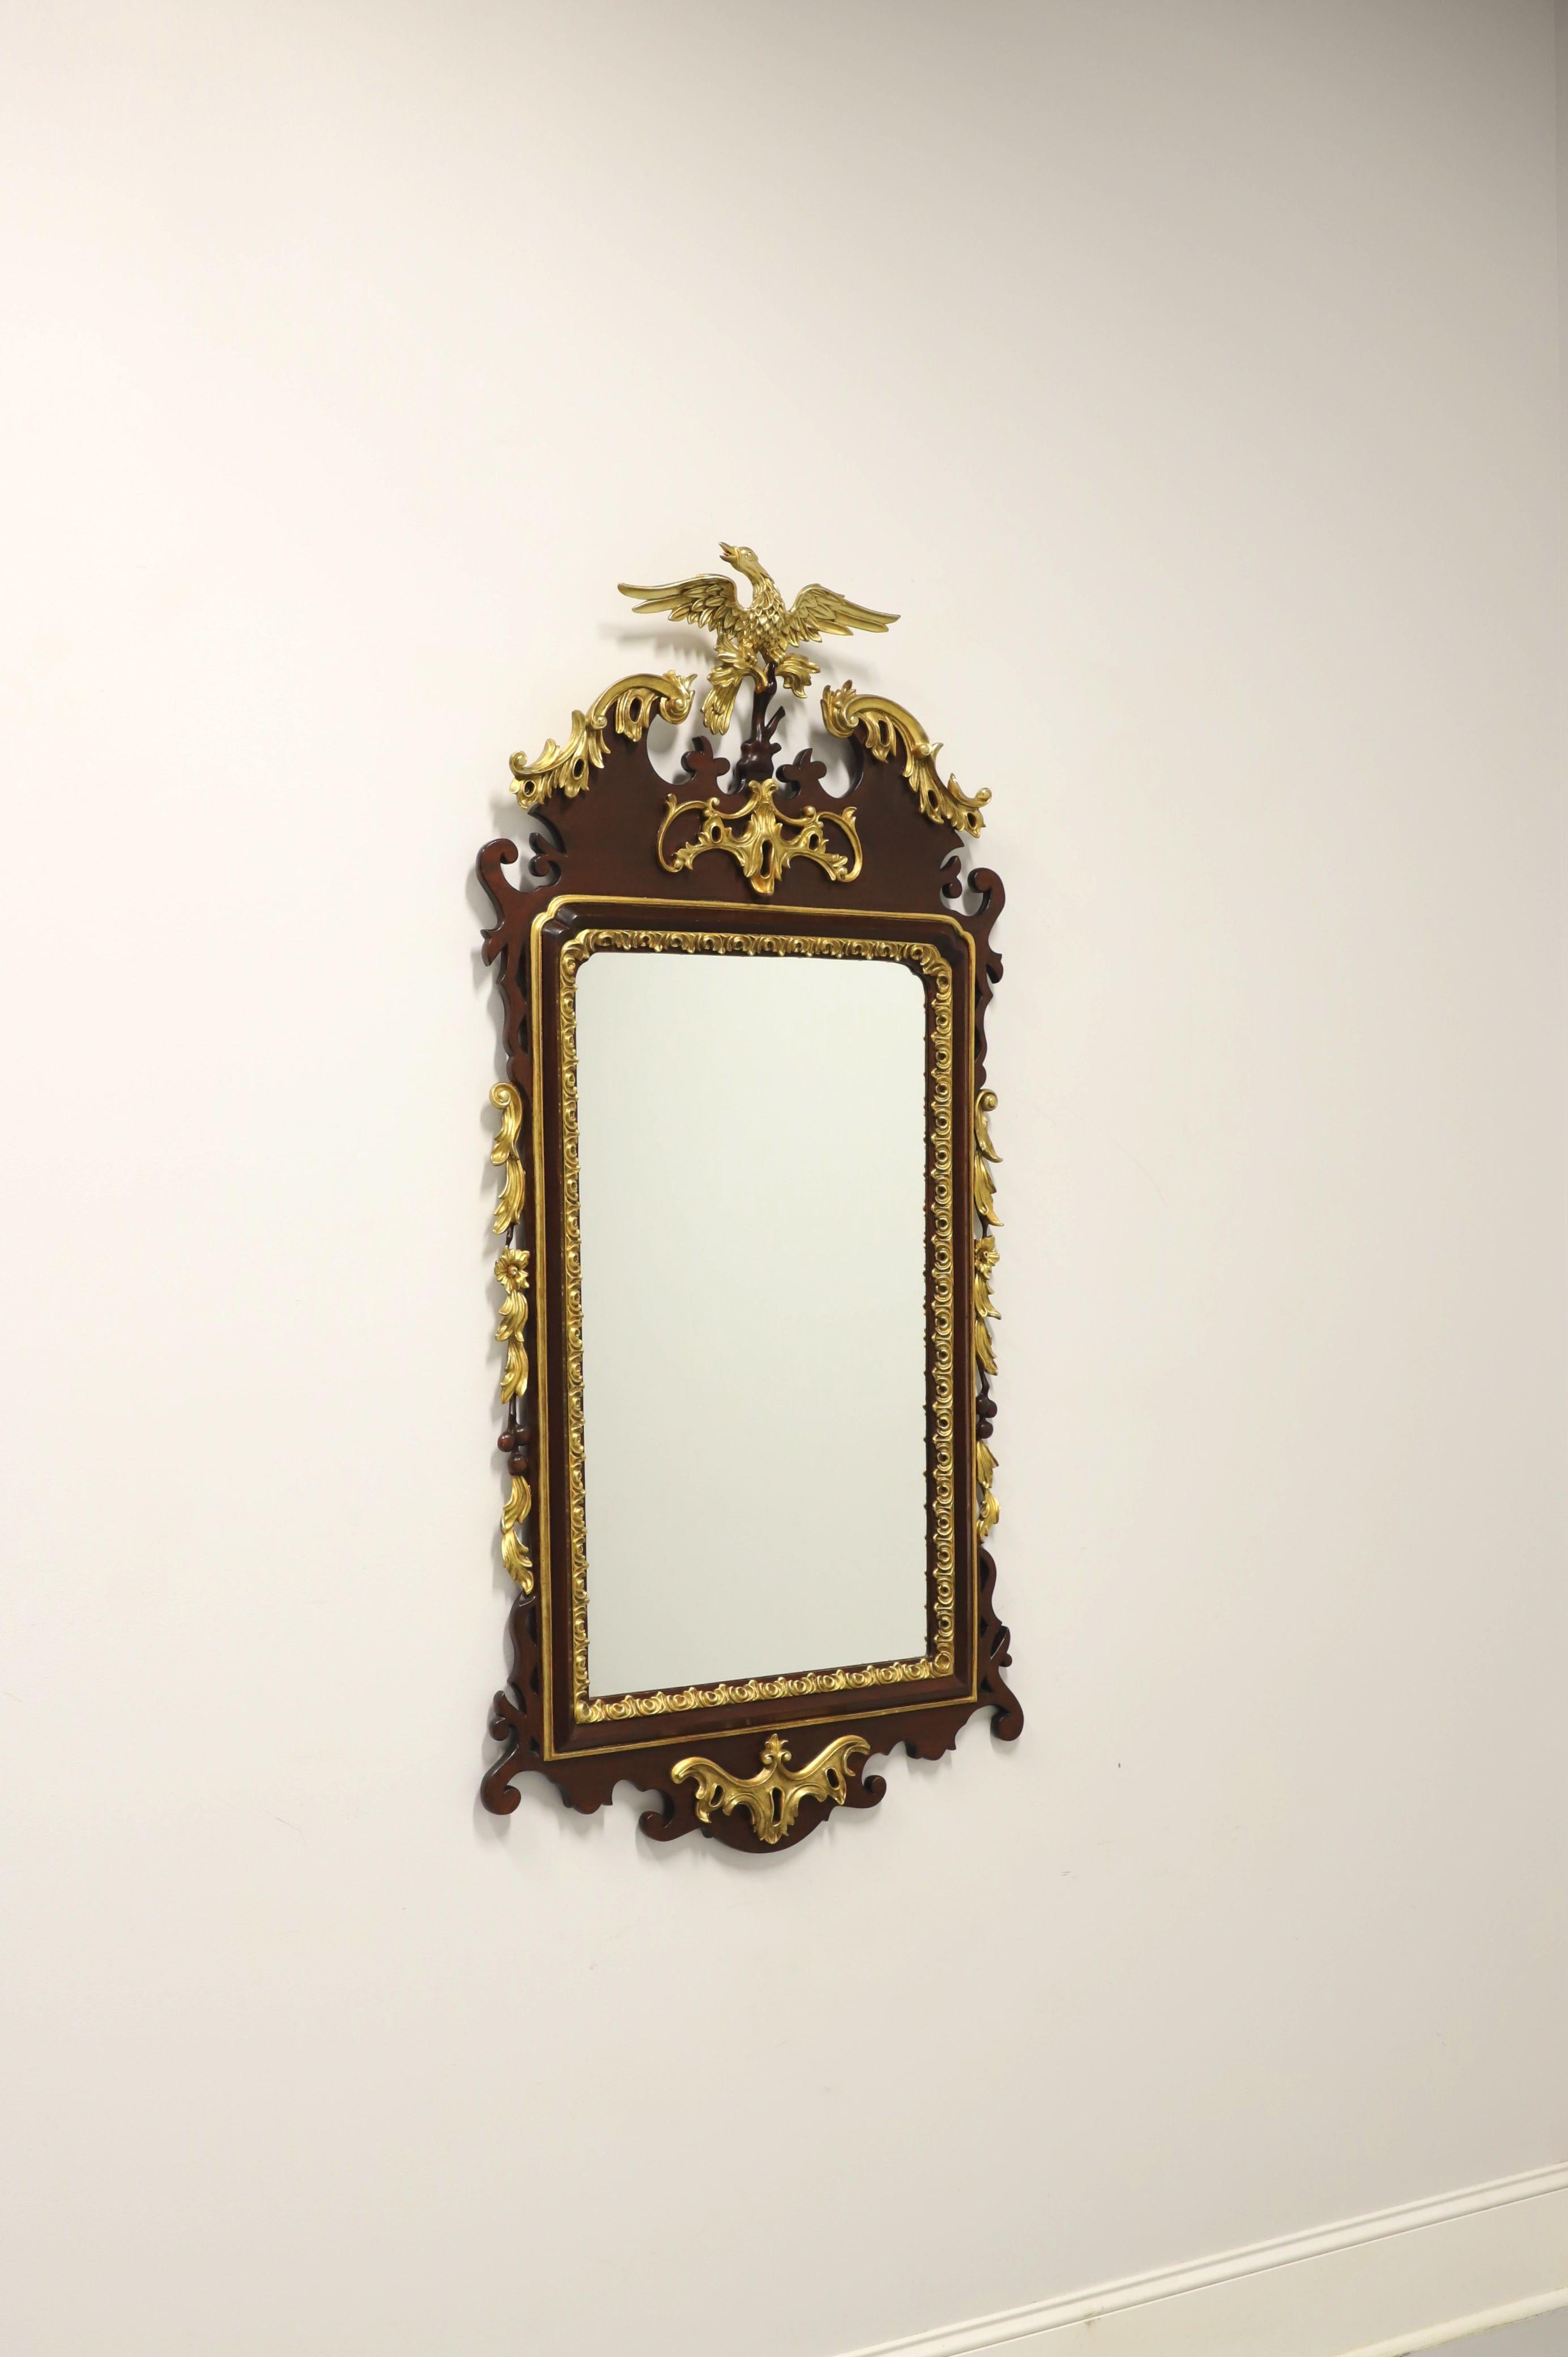 An antique Federal style wall mirror, unbranded. Mirror glass in a mahogany frame with gold gilt, decoratively carved throughout, gold escutcheon ornamentation to center of top & bottom, and a pediment design with a gold eagle on a tree branch to